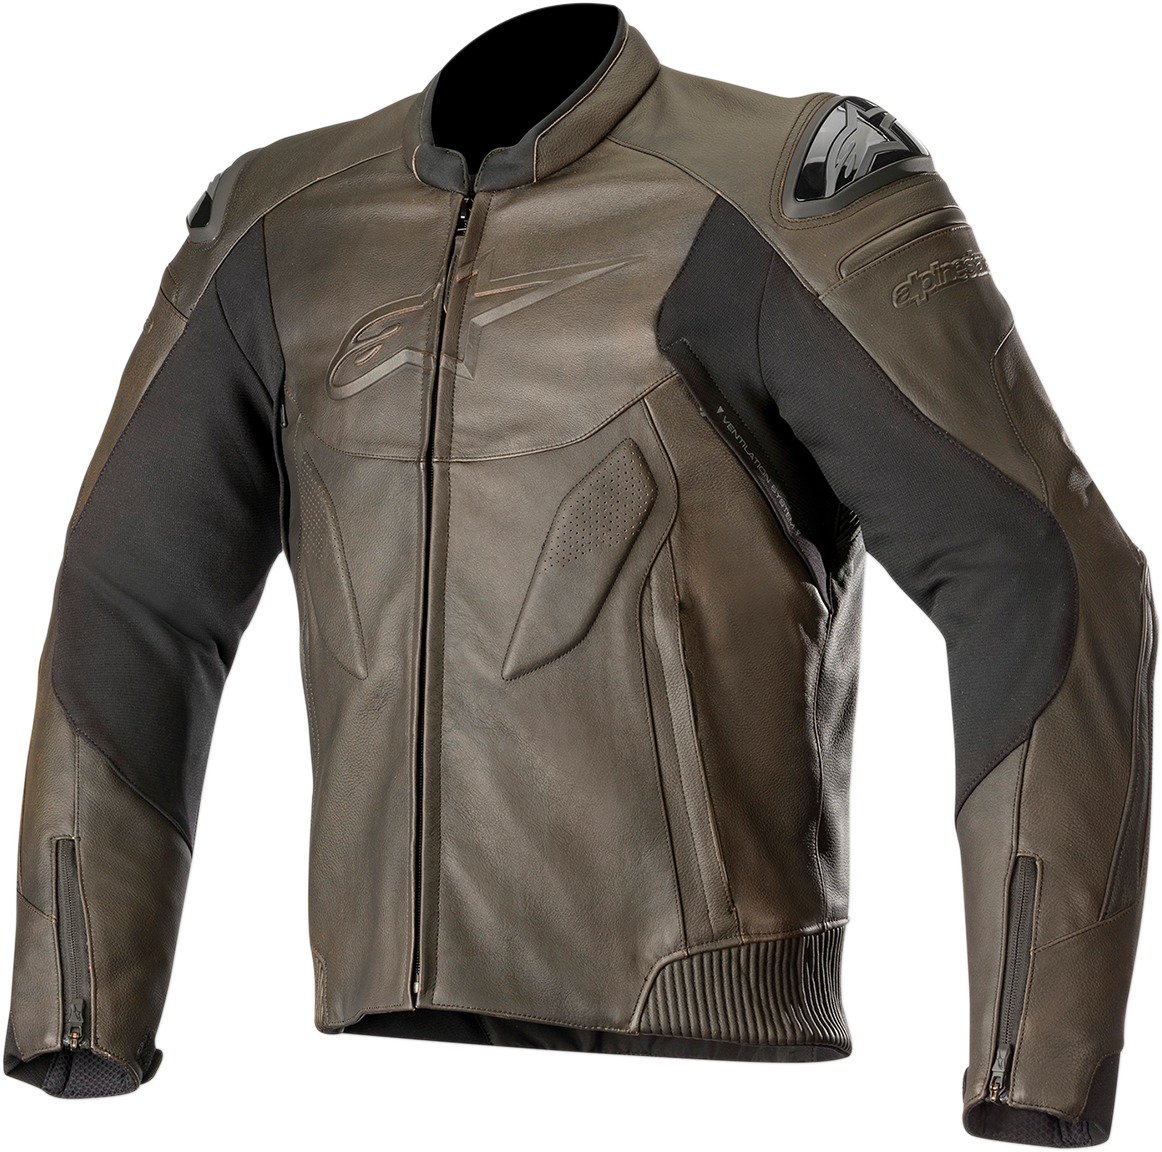 Caliber Leather Street Riding Jacket Brown US 2X-Large - Click Image to Close